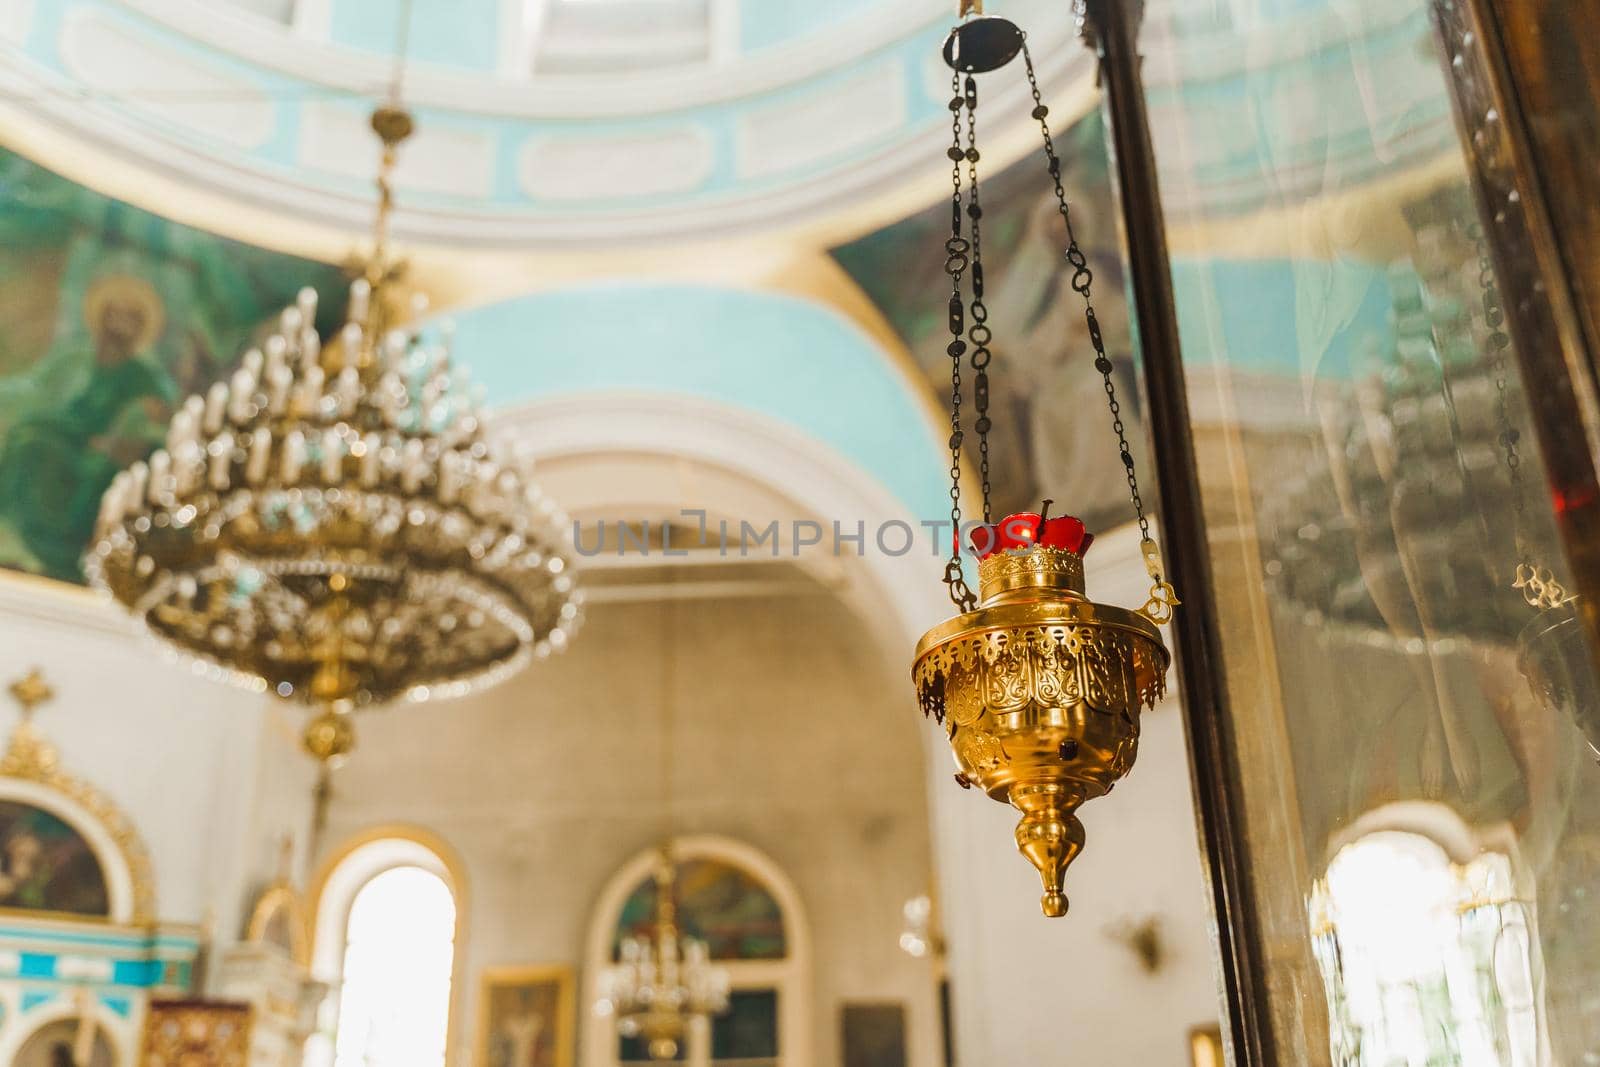 Gold censer with a red candlestick in the church. Big chandelier on the background. Church interior